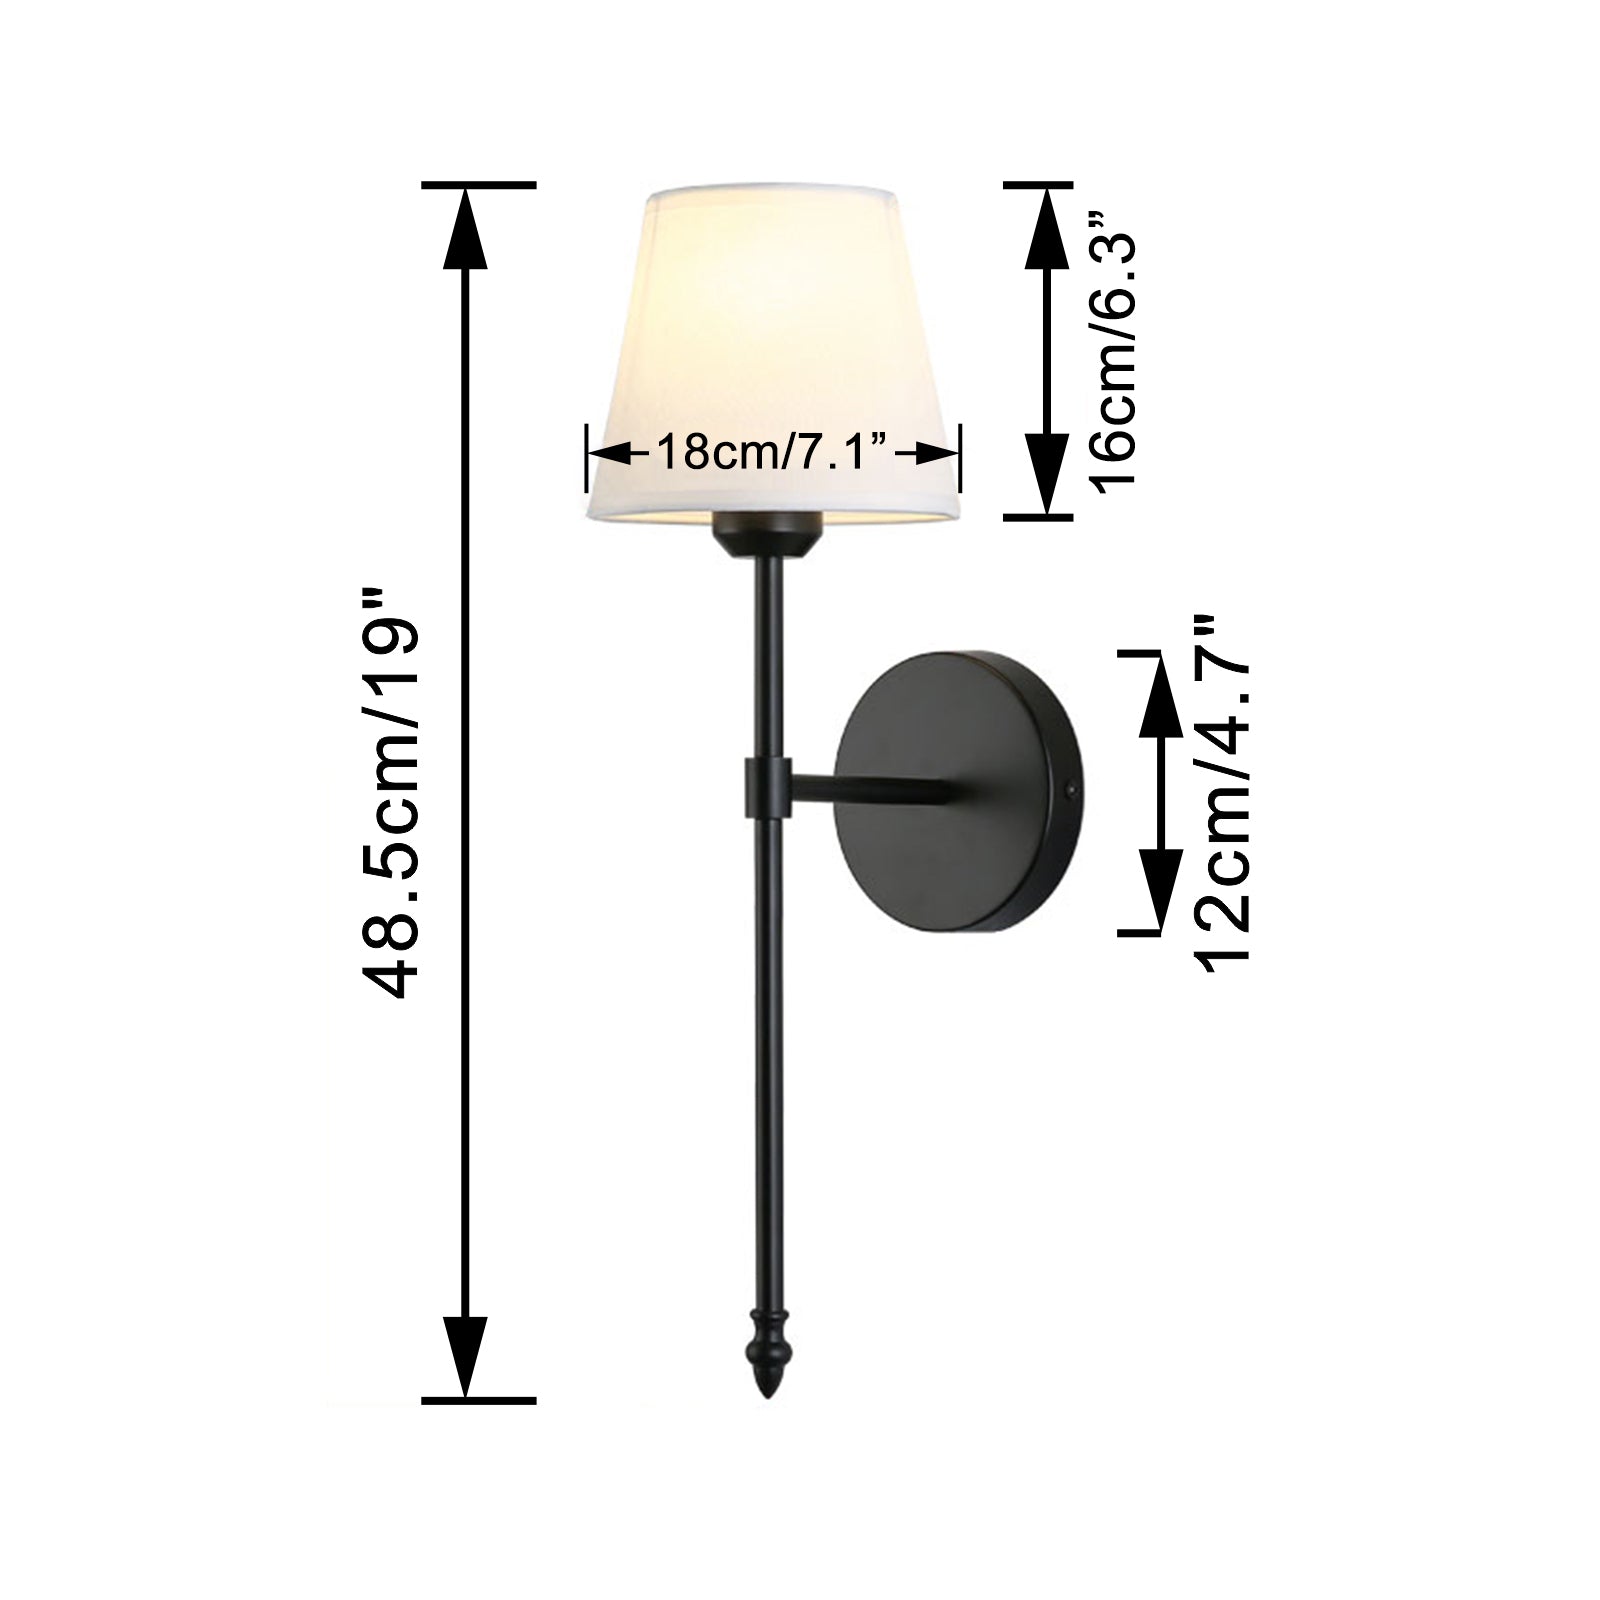 Nunu Lamp LED Rechargeable Battery Operated DIY Wireless Hook Up with Remote  Control Lighting Fixture Wall Sconces Modern Metal Shade, Nunu Lamp -  Online Shopping